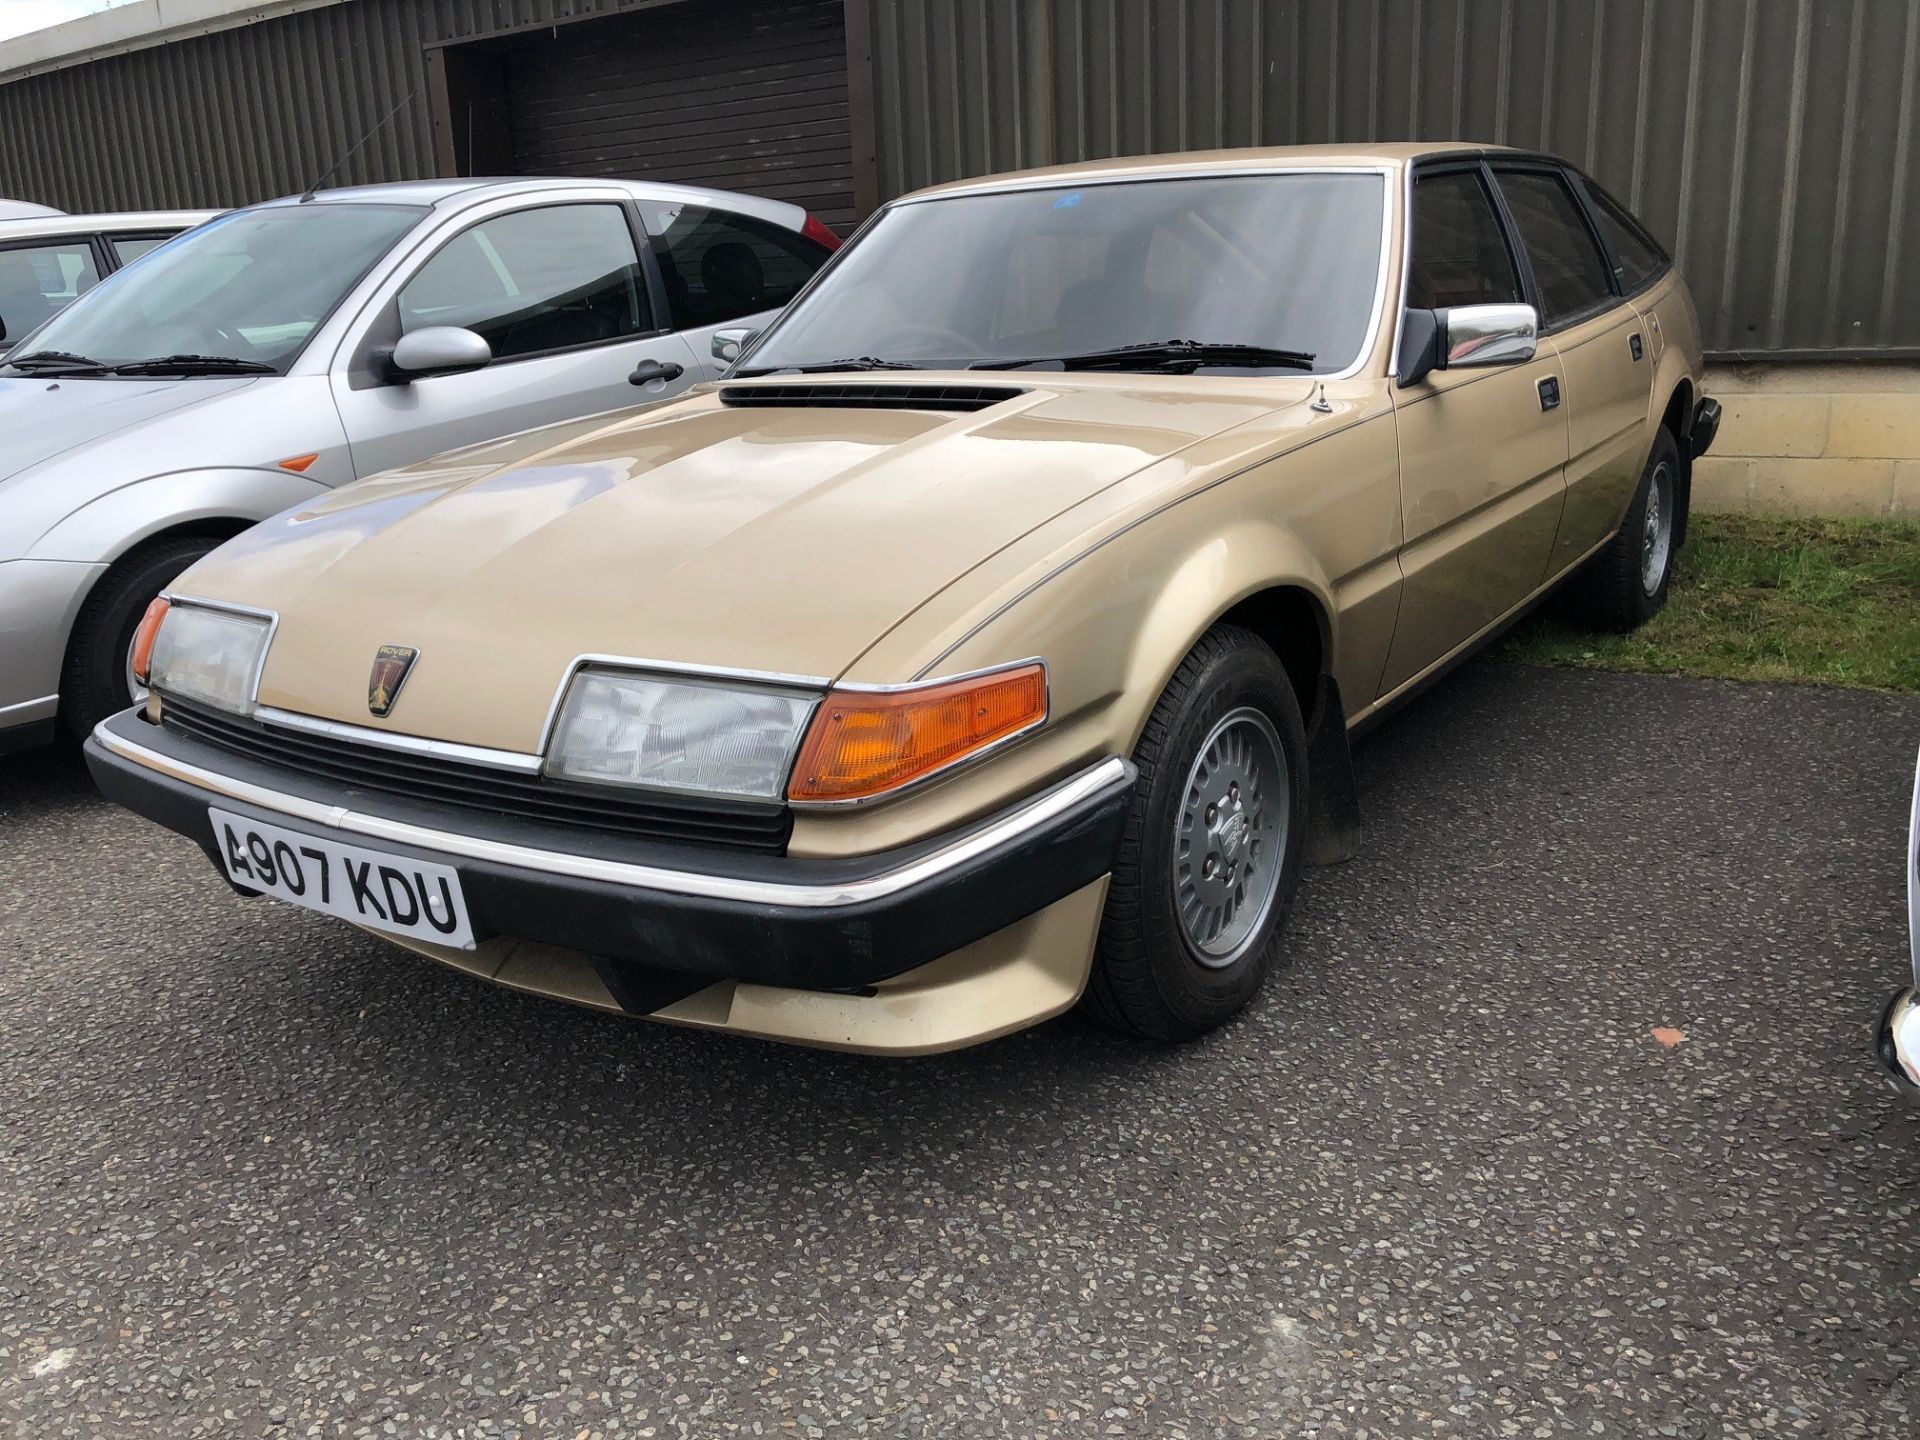 1984 Rover SD1 2300S Registration number A907 KDU Champagne Gold metallic Automatic Low miles - Image 2 of 14